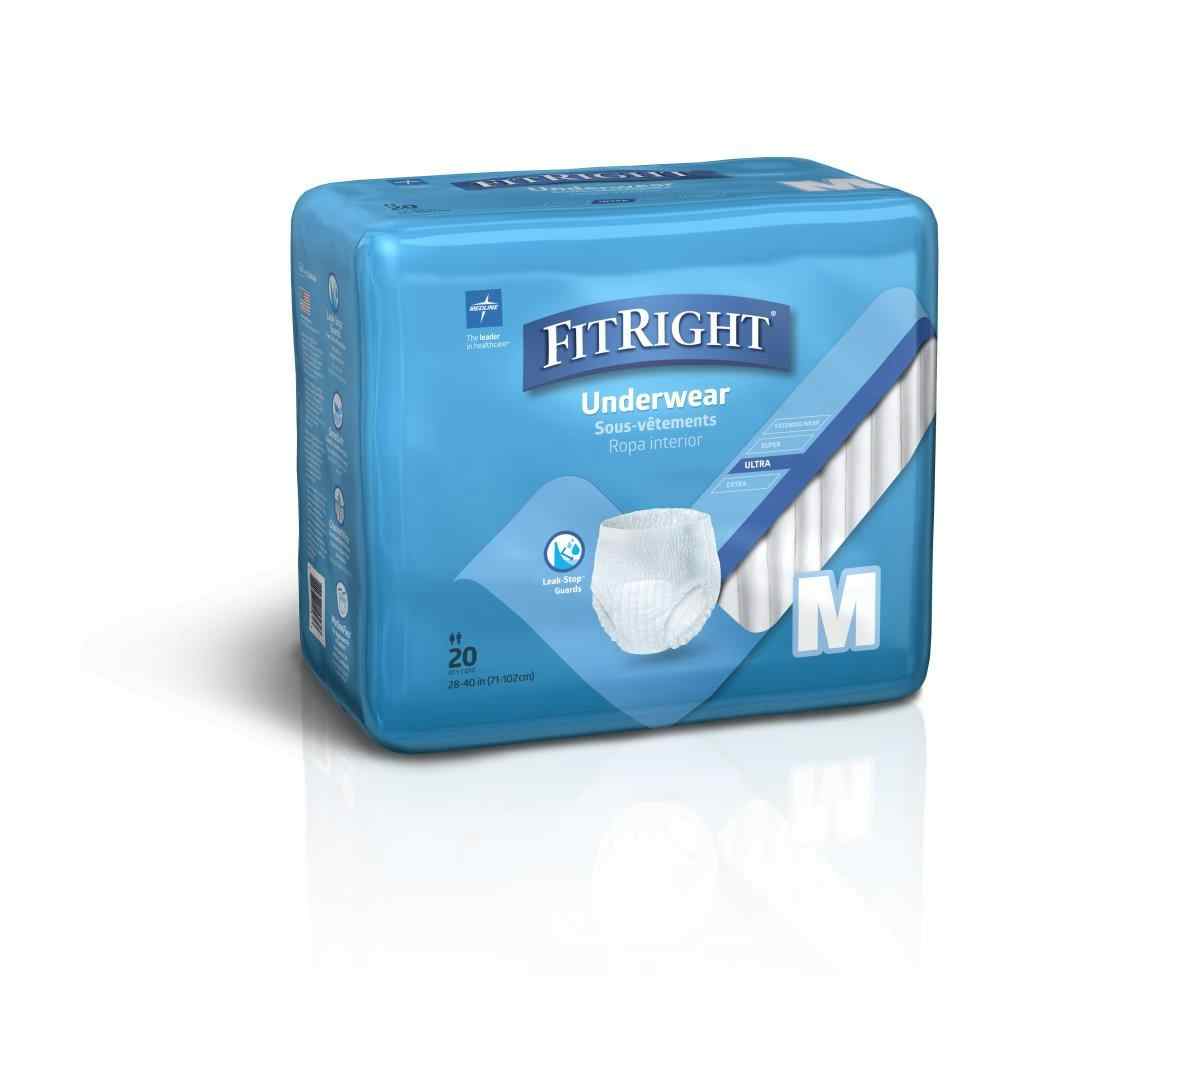 FitRight Ultra Protective Underwear, Moderate Absorbency, FIT23005AZ, M (28"-40") - Bag of 20